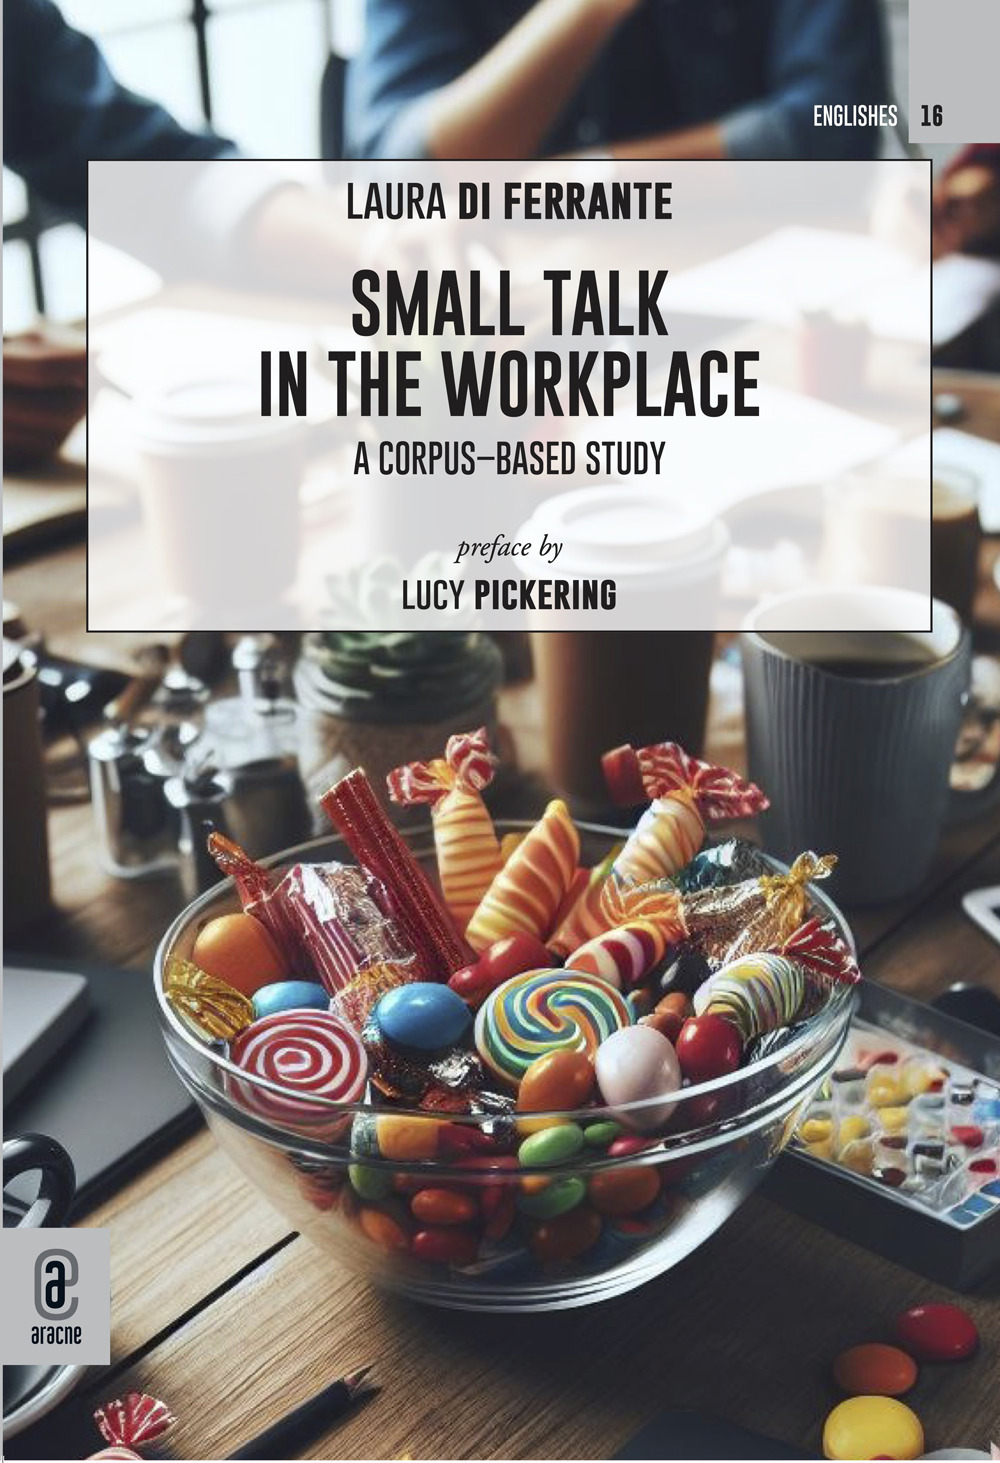 Small talk in the workplace. A corpus-based study